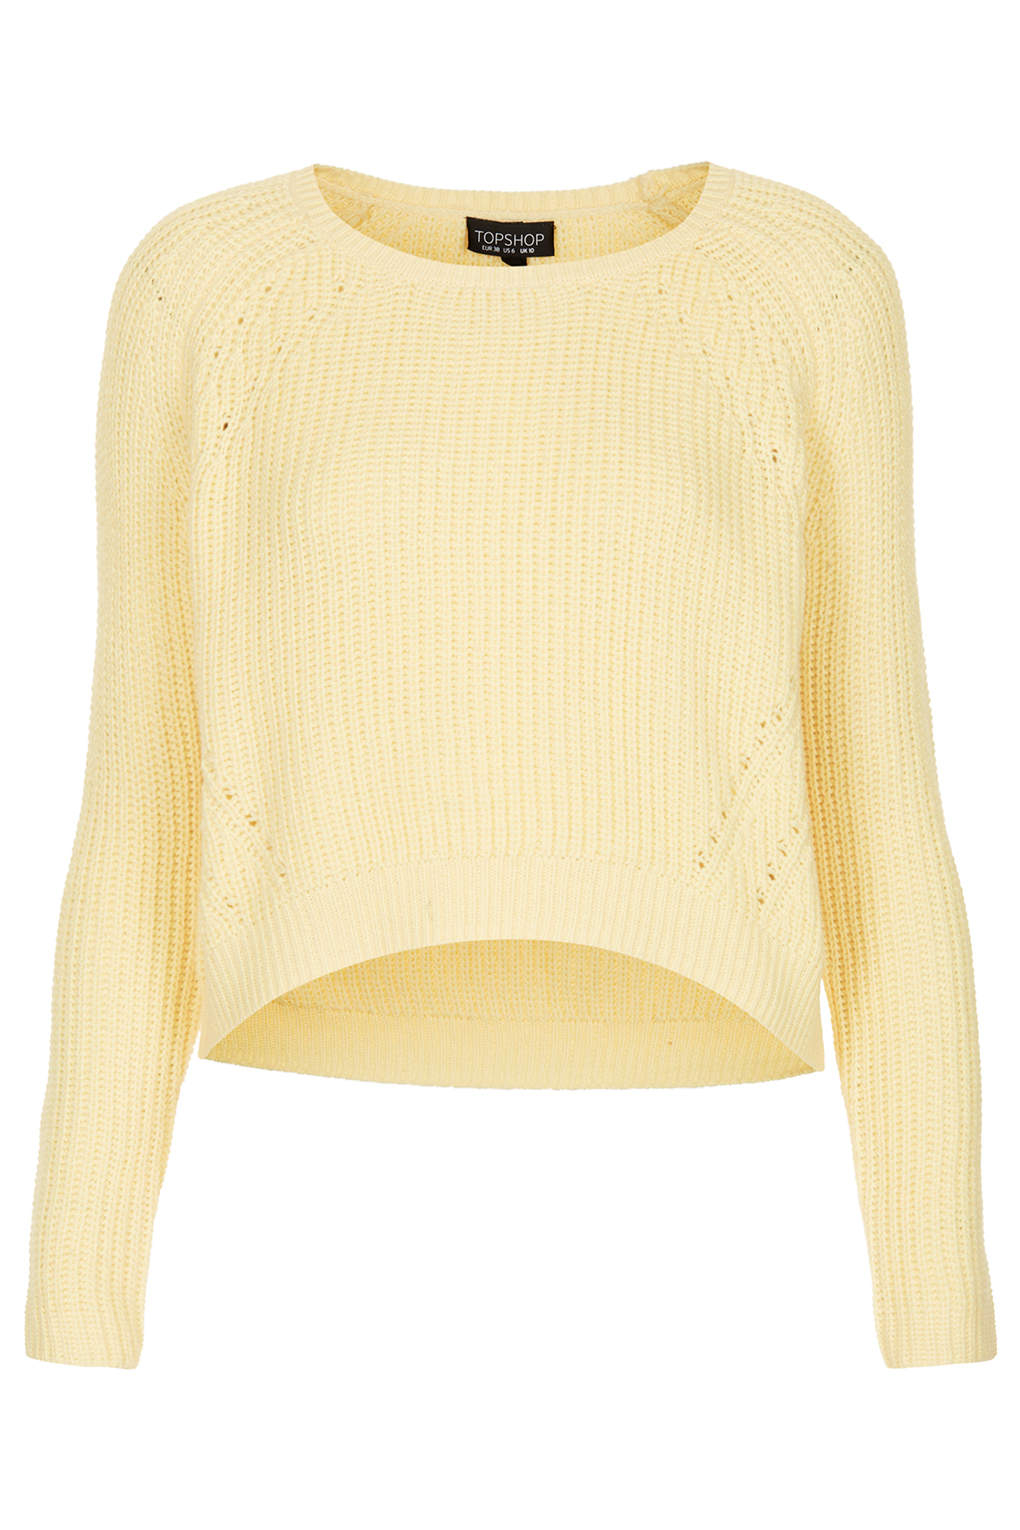 Lyst - Topshop Knitted Curve Crop Jumper in Yellow